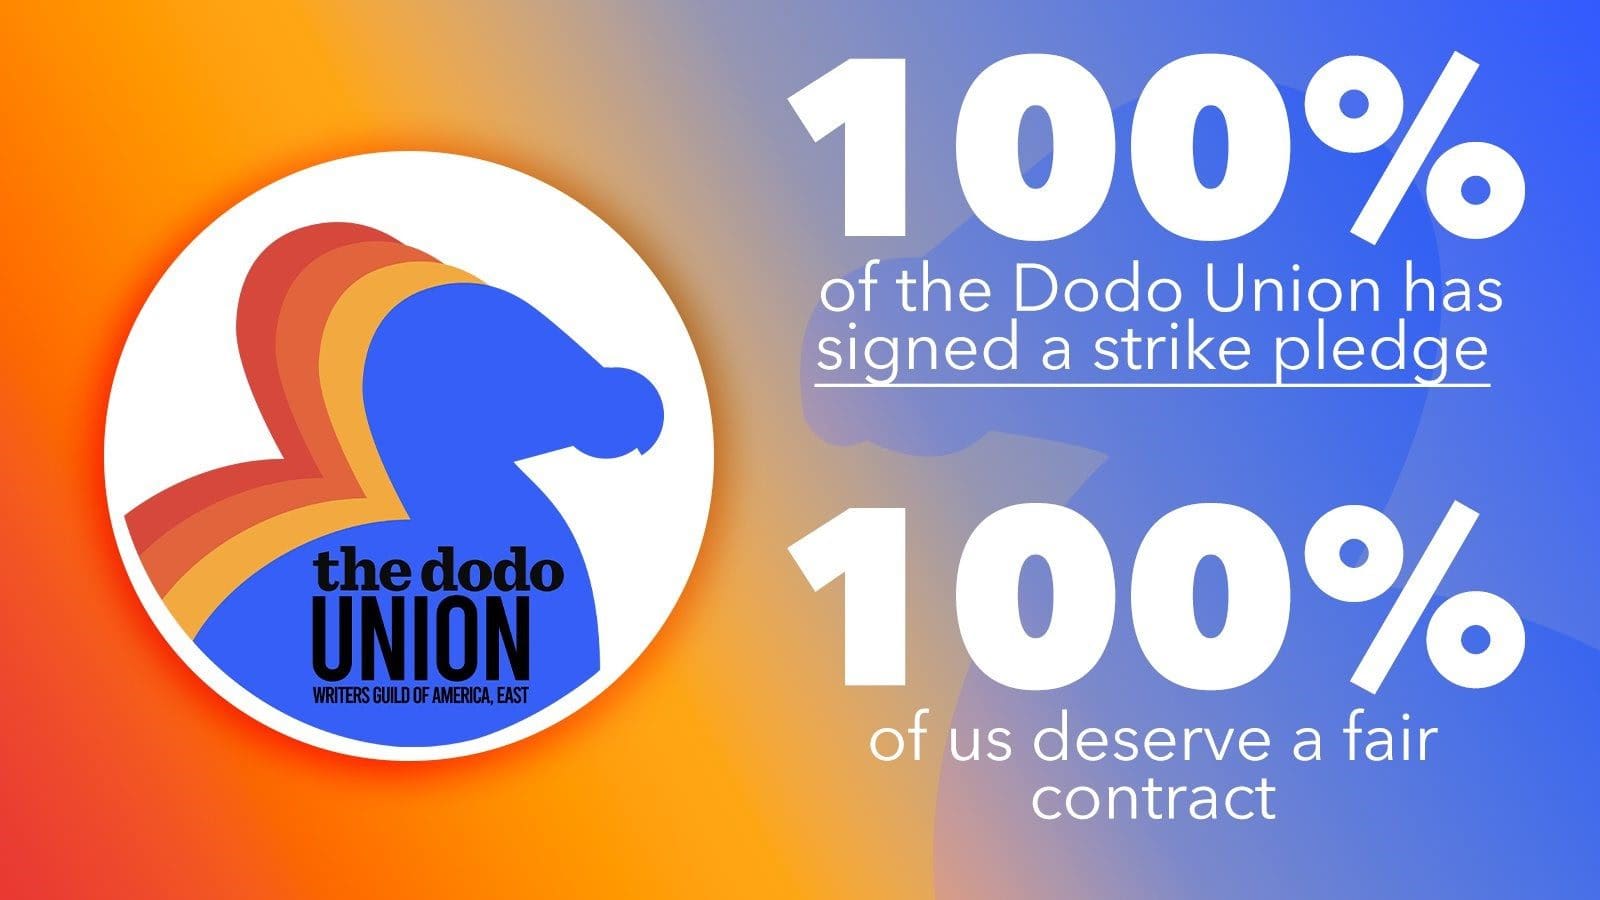 Support workers at the Dodo